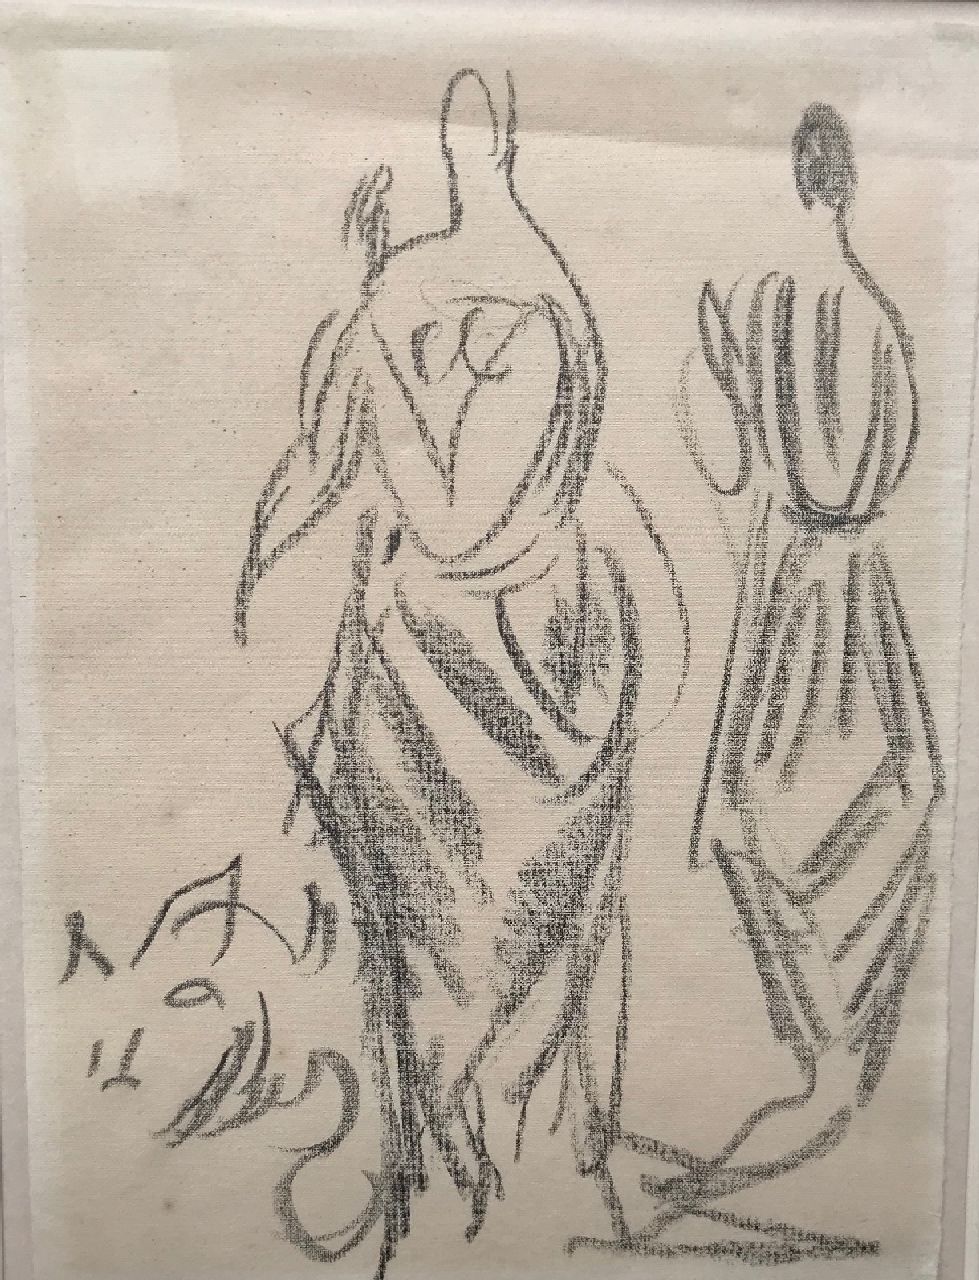 Dufy R.  | Raoul Dufy | Watercolours and drawings offered for sale | Robe pour Paul Poiret, pencil on paper 24.5 x 18.0 cm, executed ca. 1917